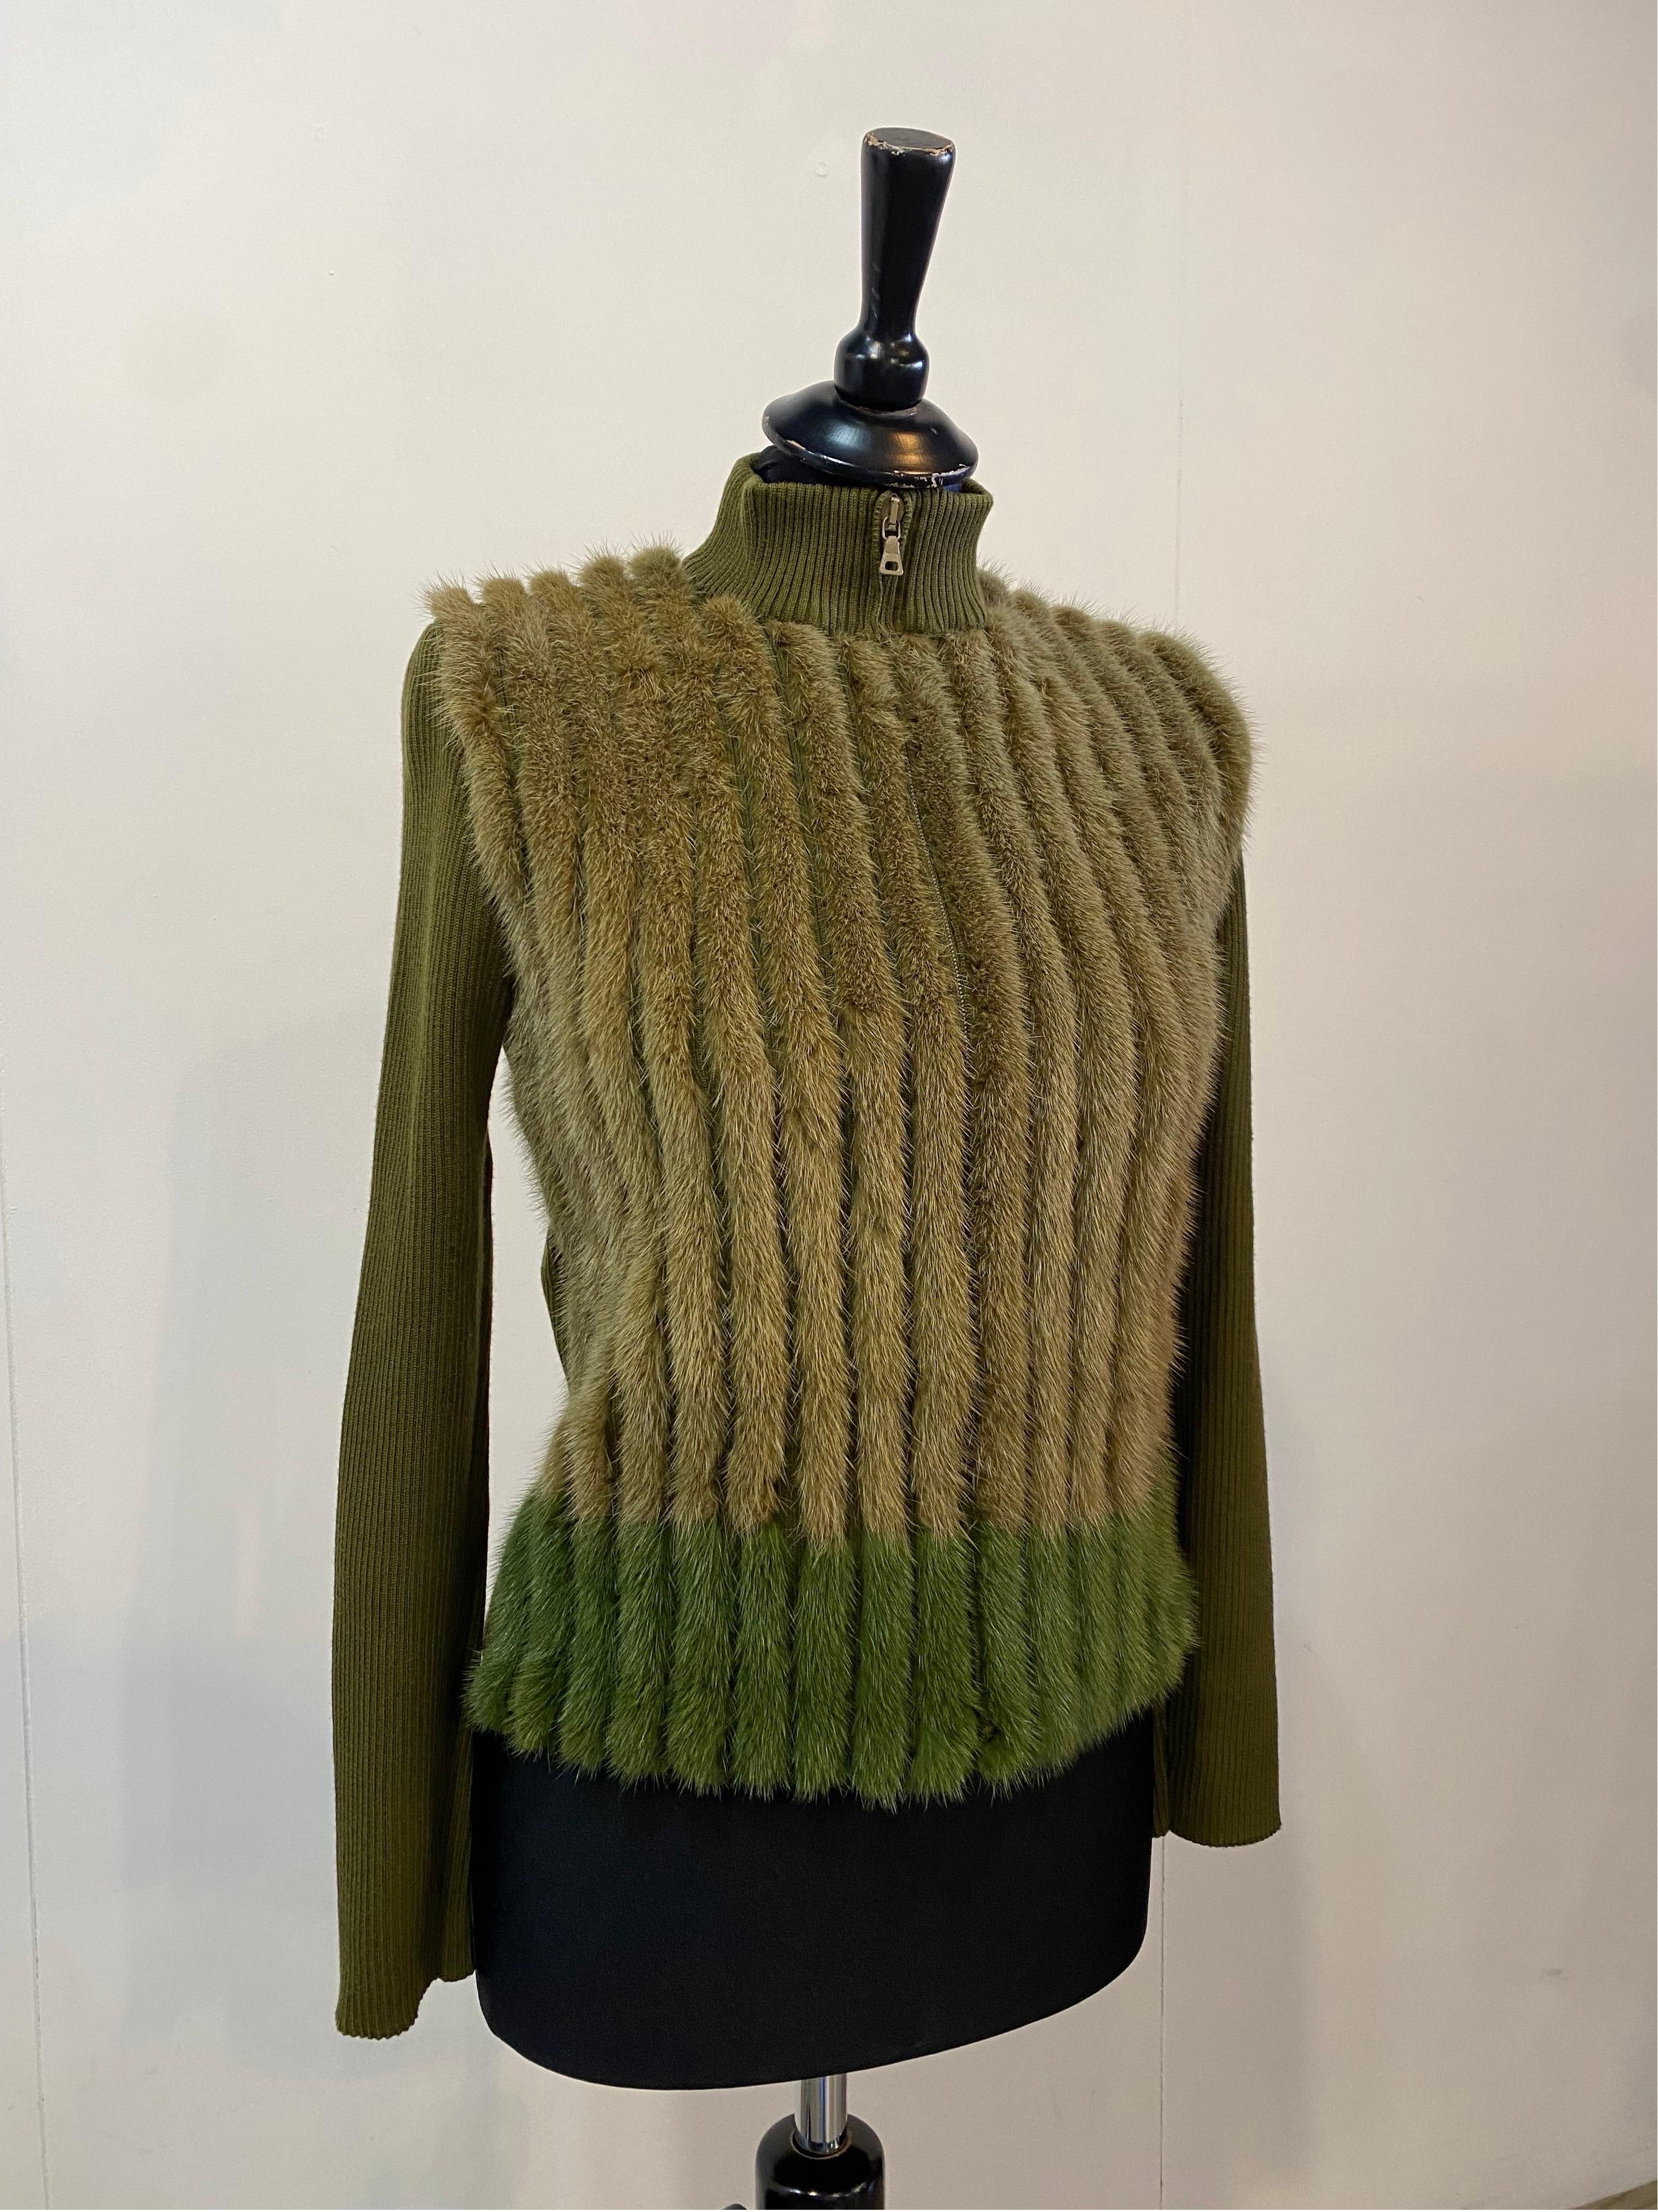 Prada Cardigan.
Fall Winter 2000.
In 100% virgin wool.
Inserts in mink dyed fur.
Italian size 42.
Shoulders 40 cm
Bust 40 cm
Length 58 cm
Sleeve 60 cm
Excellent general condition, like new.